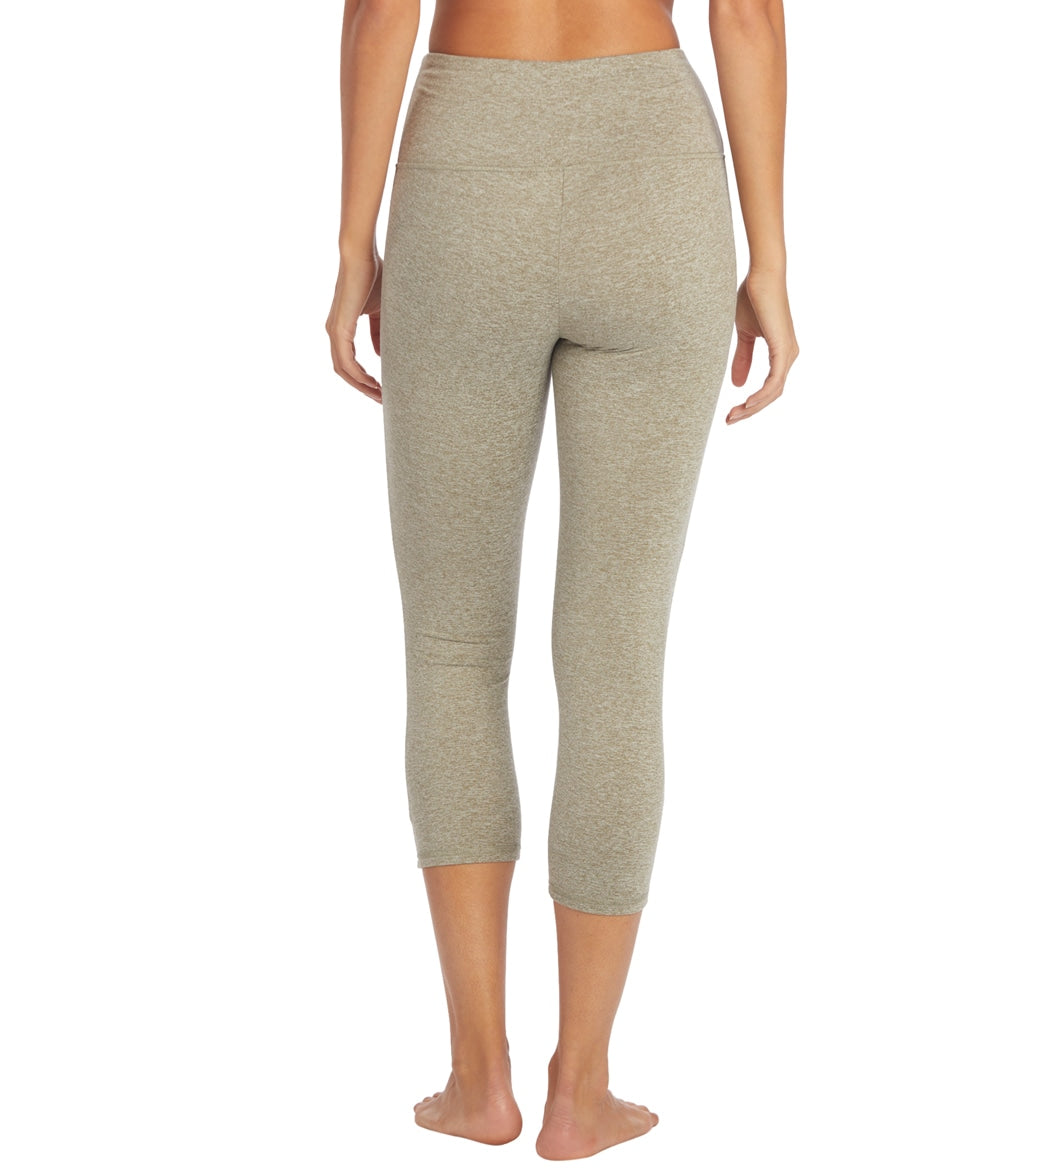 Zobha Shop Holiday Deals on Womens Pants